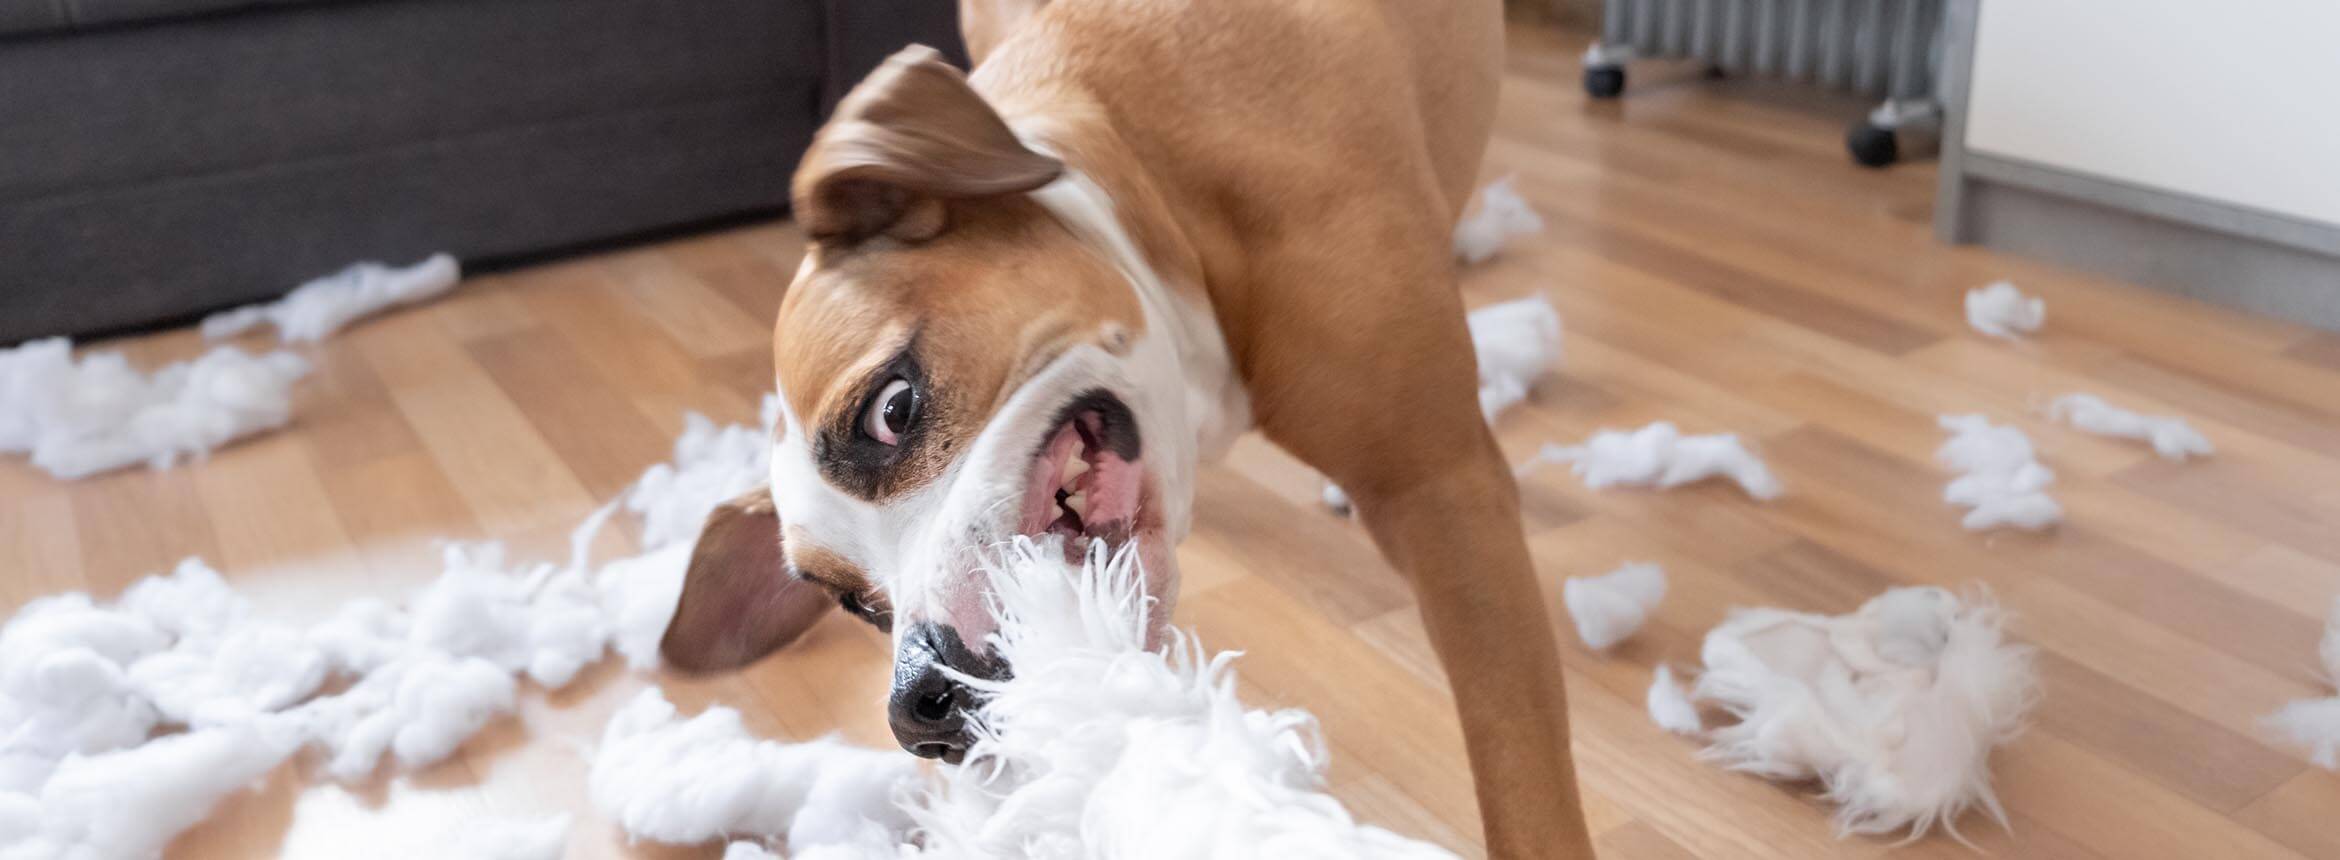 image of a dog destroying a pillow